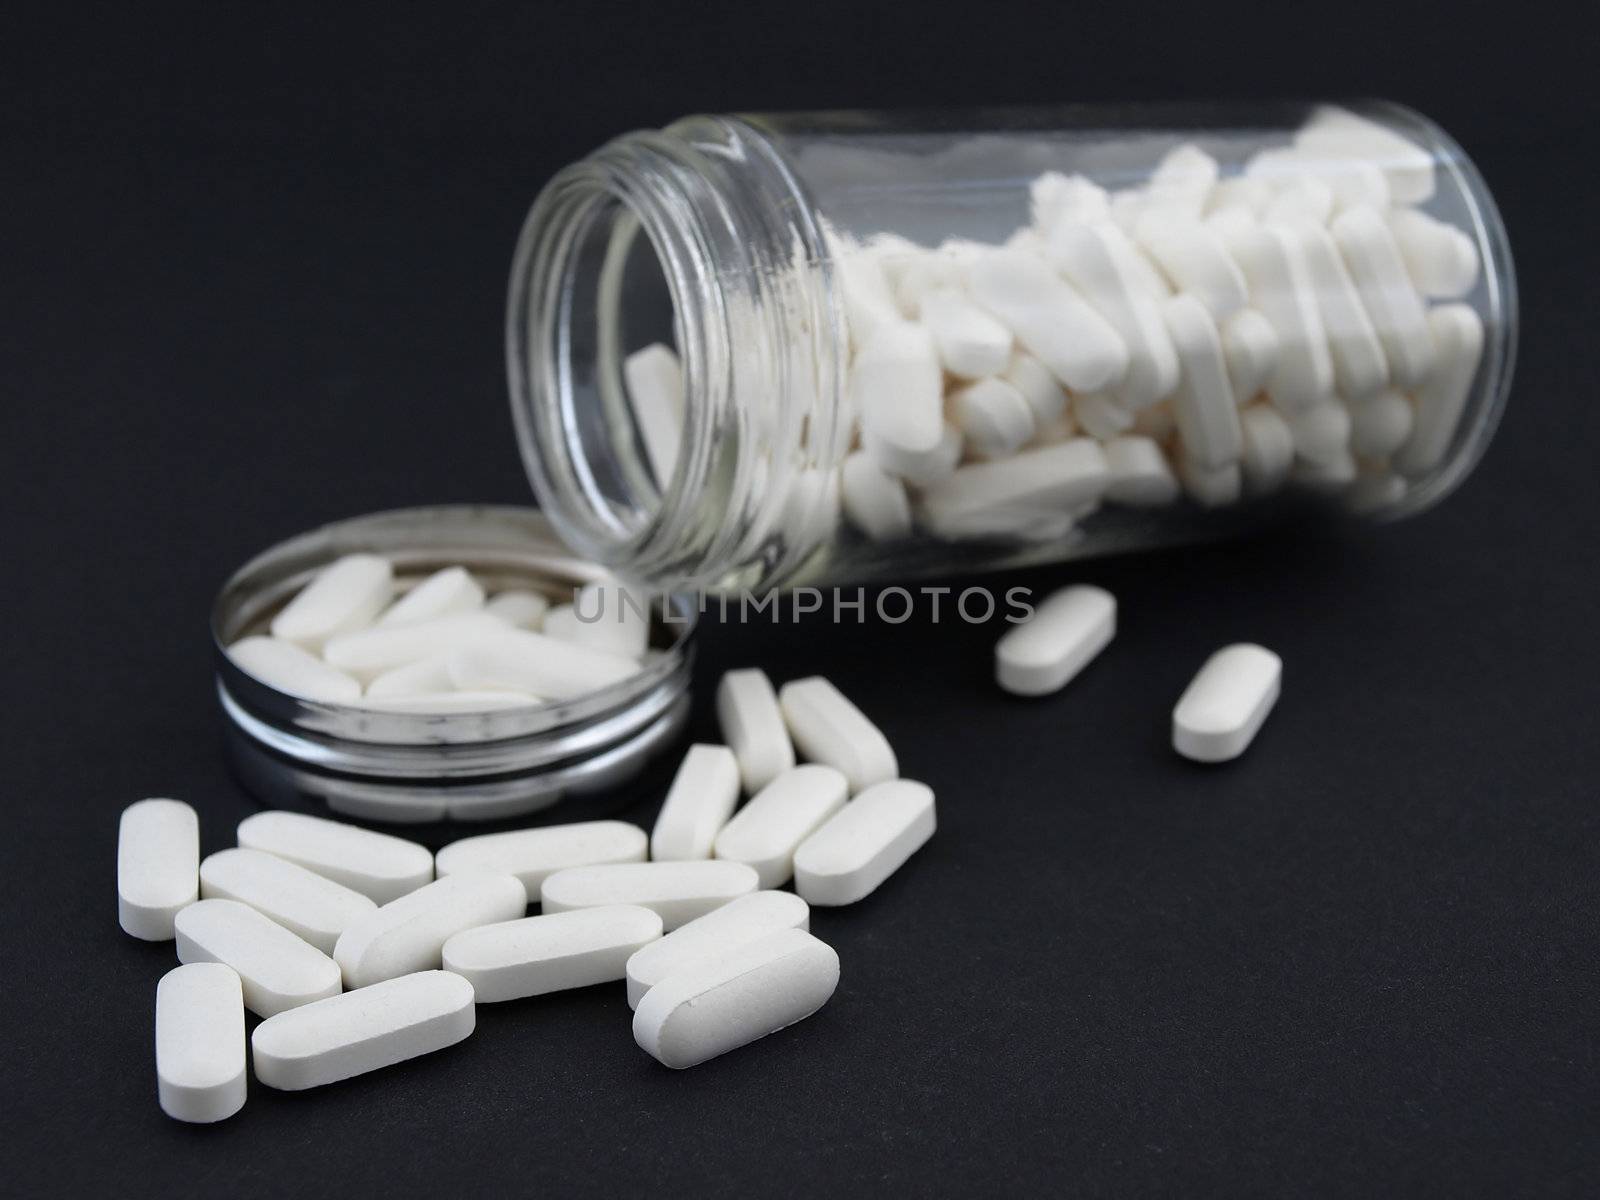 Large white pills spilling from a glass jar, studio isolated against a black background.